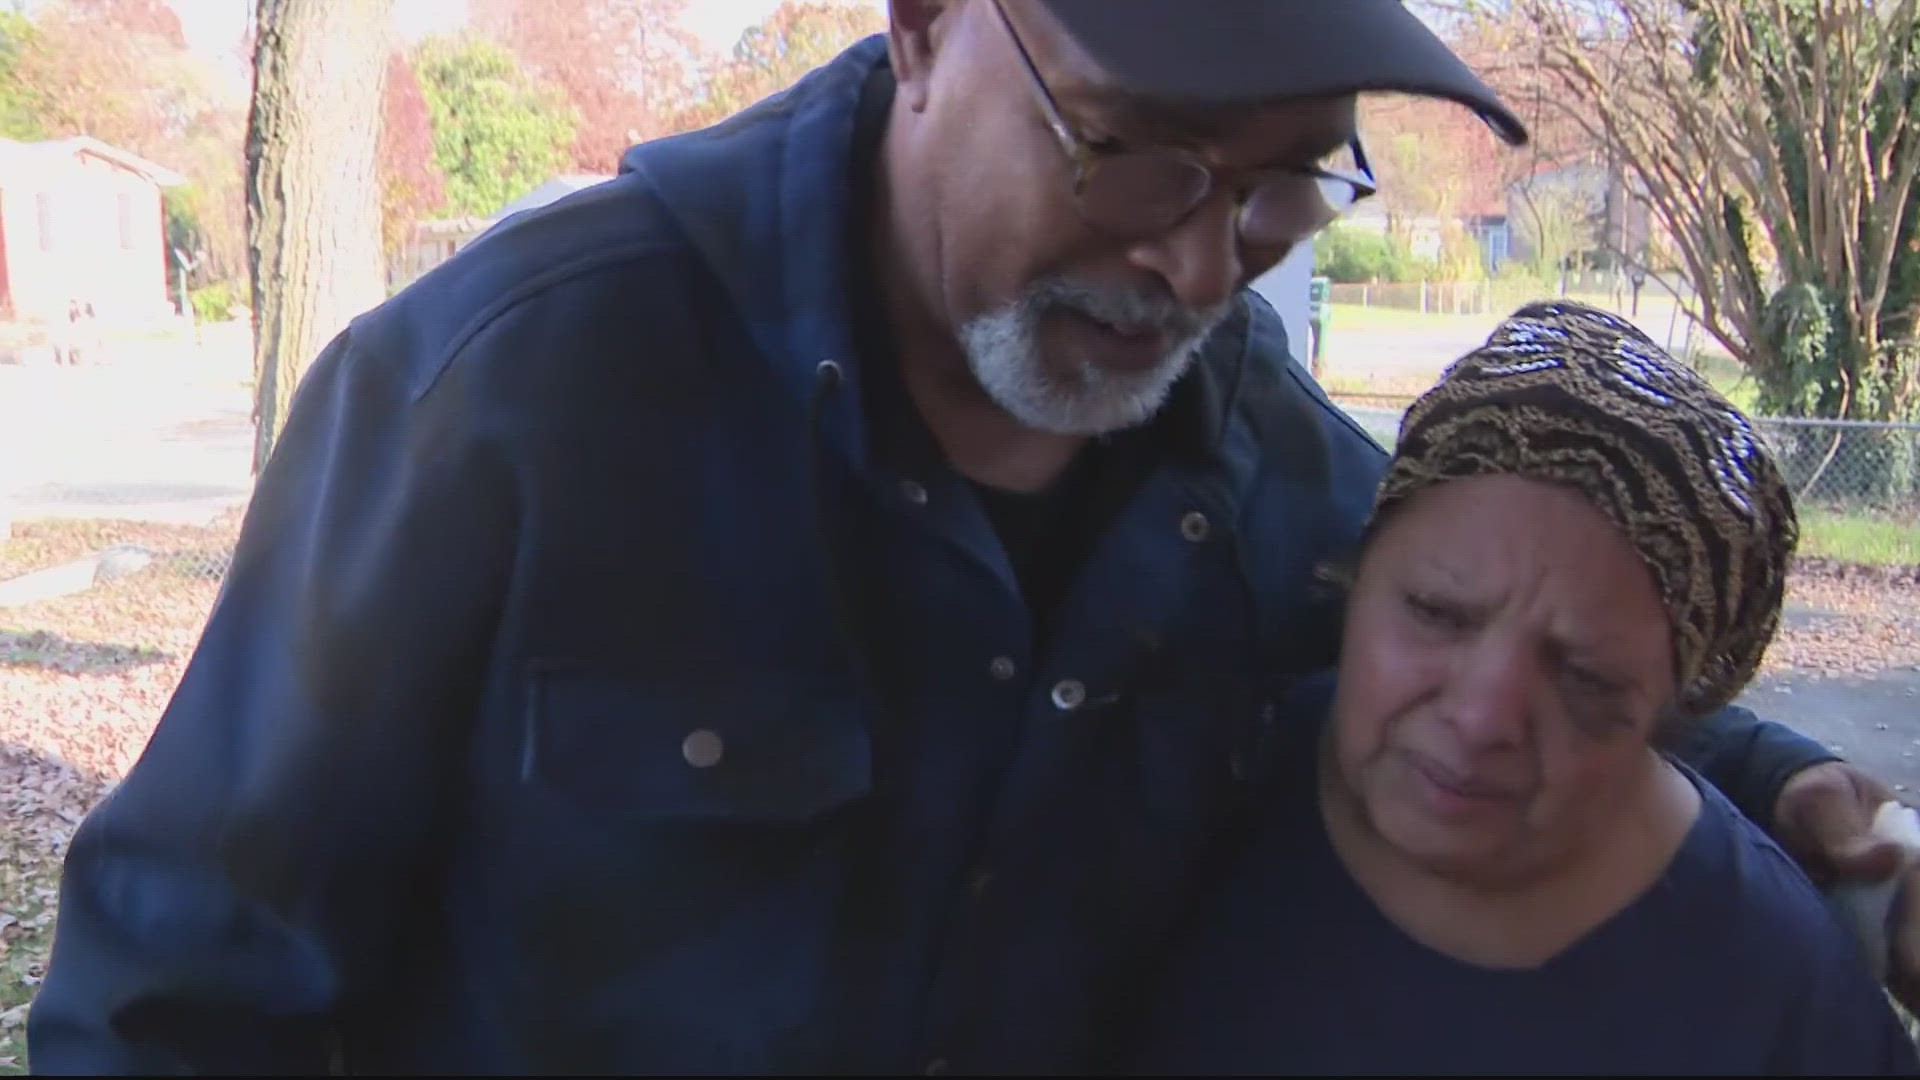 After a woman was stabbed at random, a good Samaritan helped her until EMS arrived. Now, the two are reuniting for the first time.